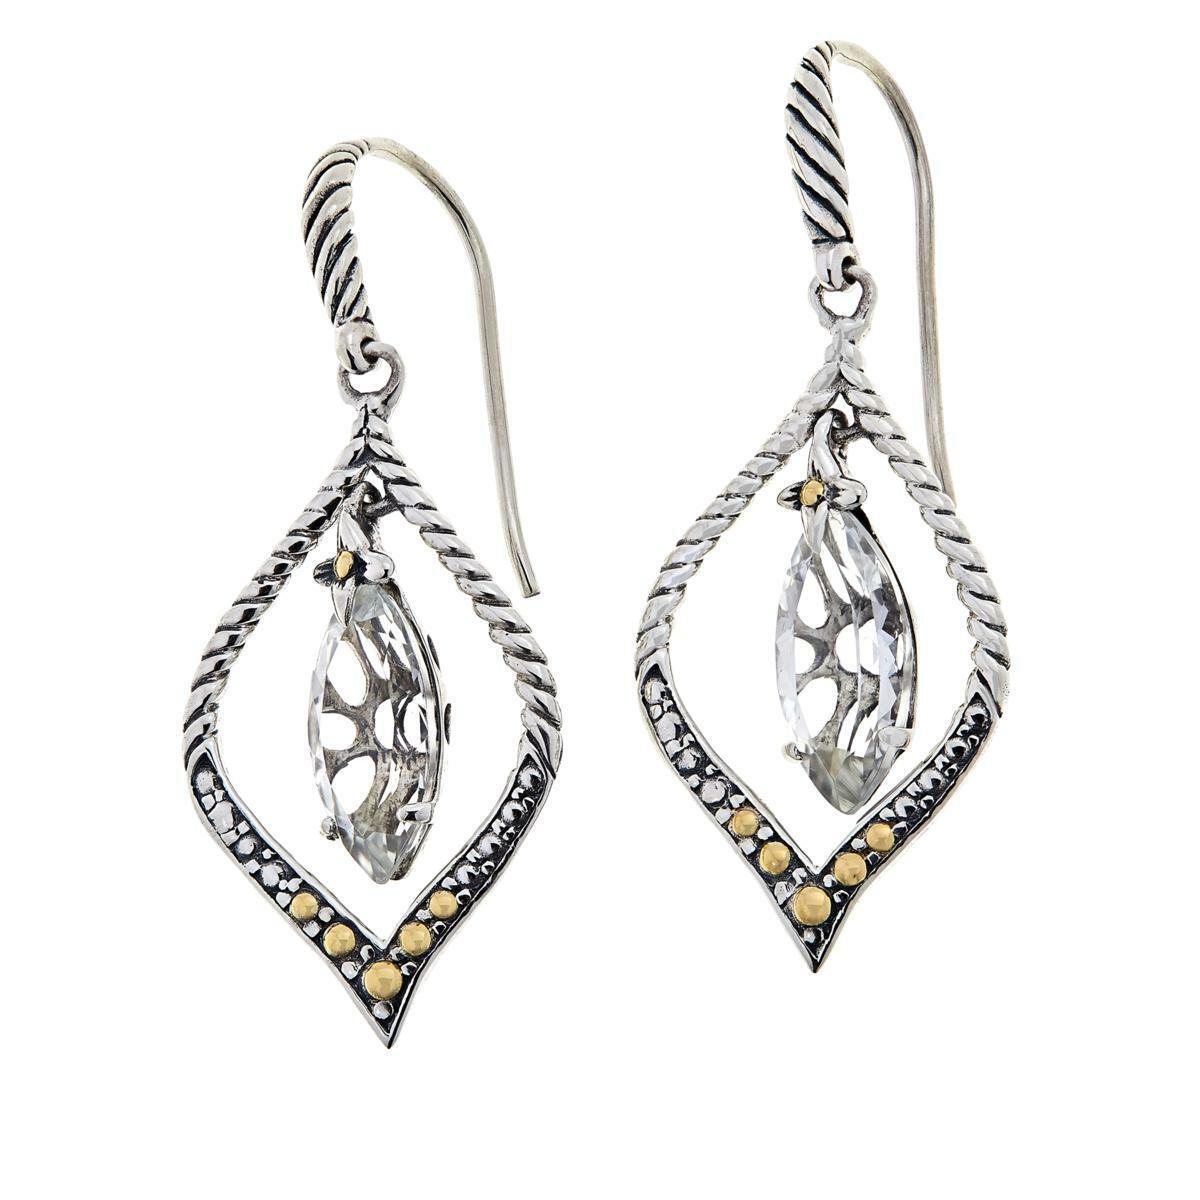 Bali Designs Marquise White Topaz Cable Hook Drop Earrings HSN $170.00